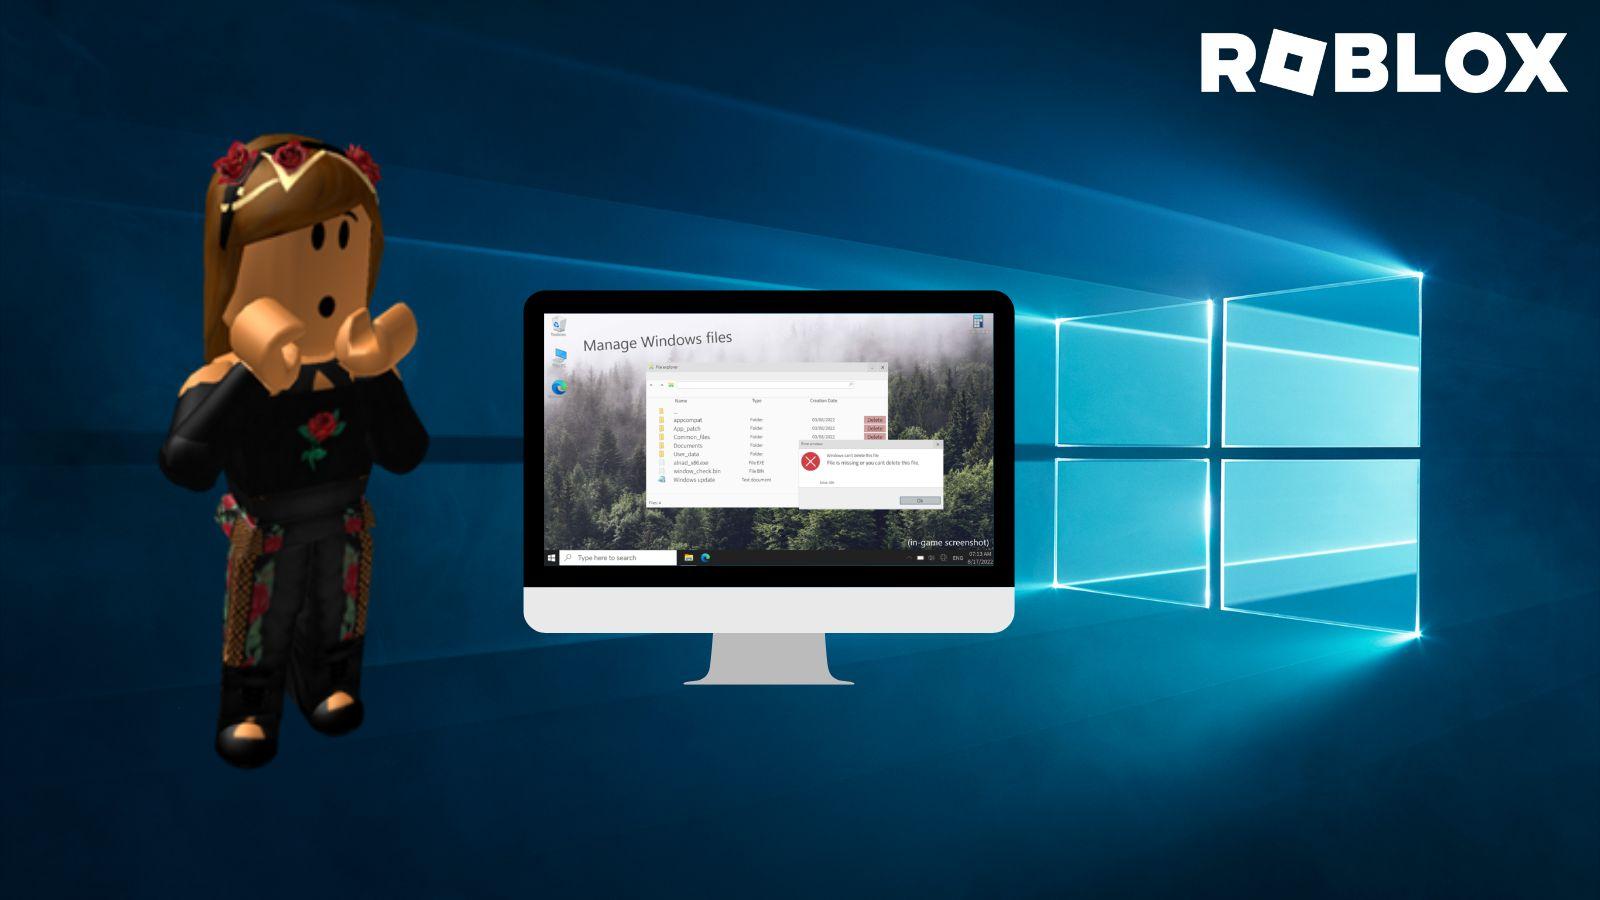 Making a roblox version of windows 10 (Link to game will be in